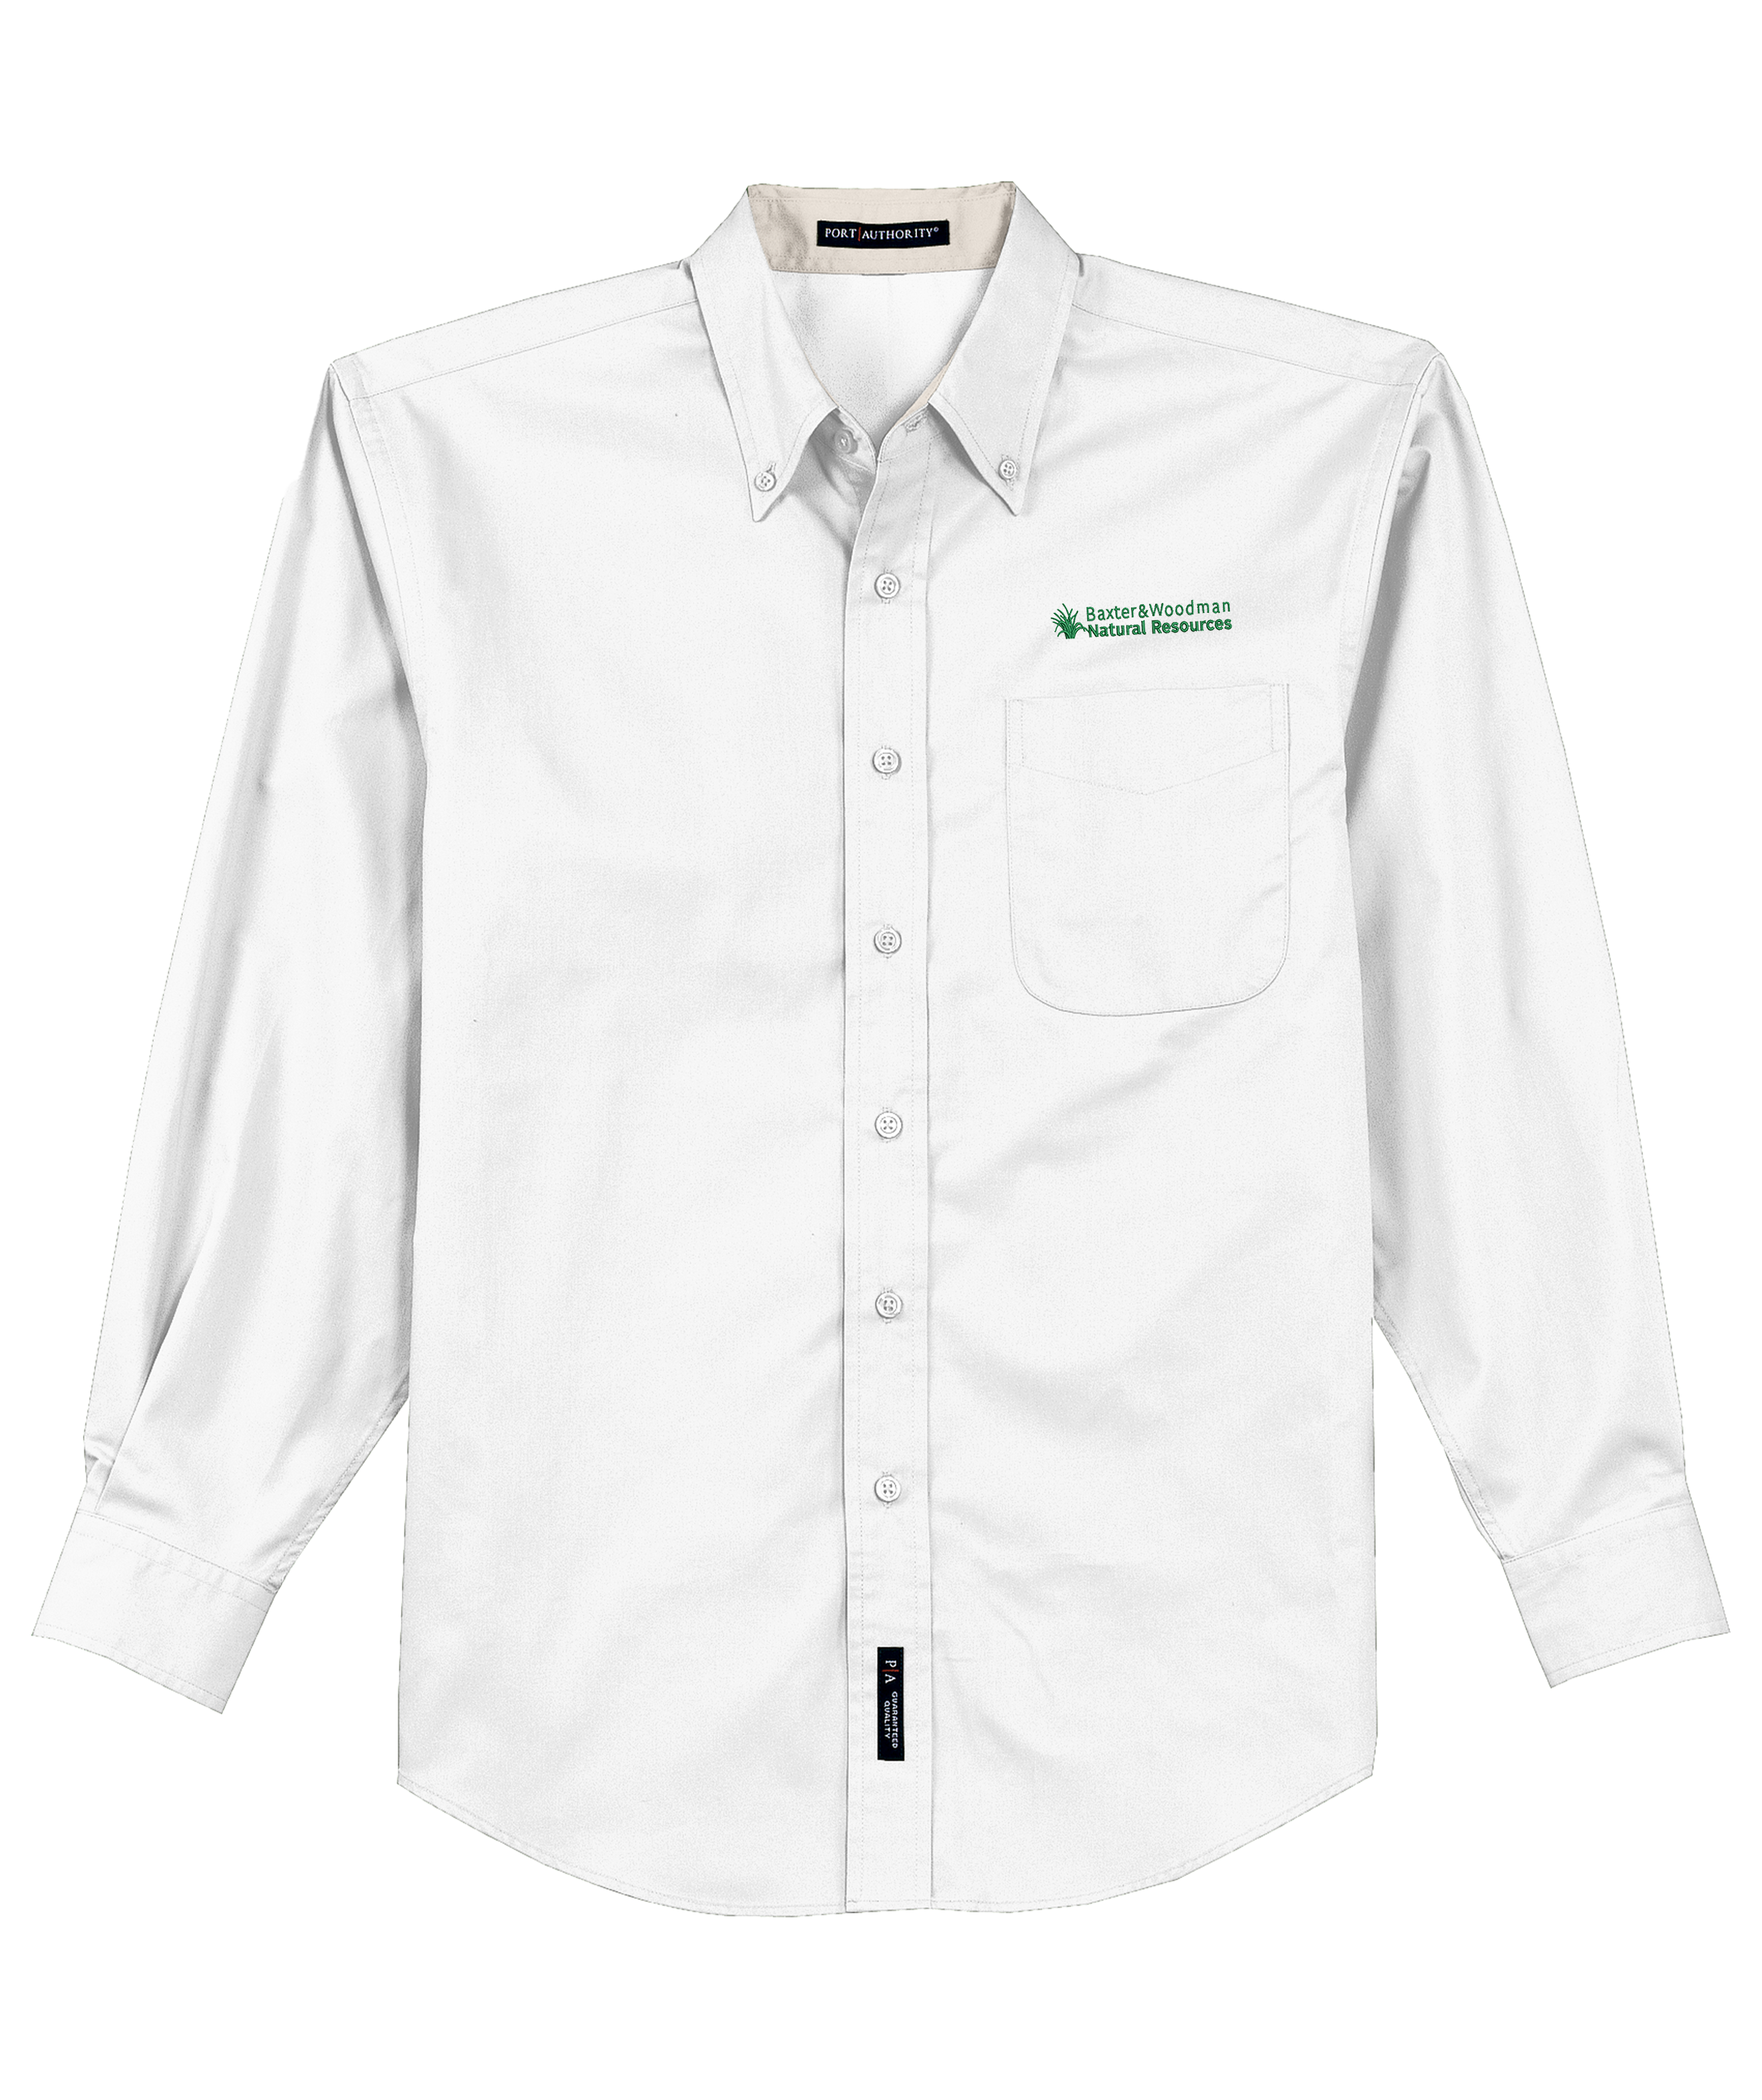 Natural Resources Port Authority® Long Sleeve Easy Care Shirt